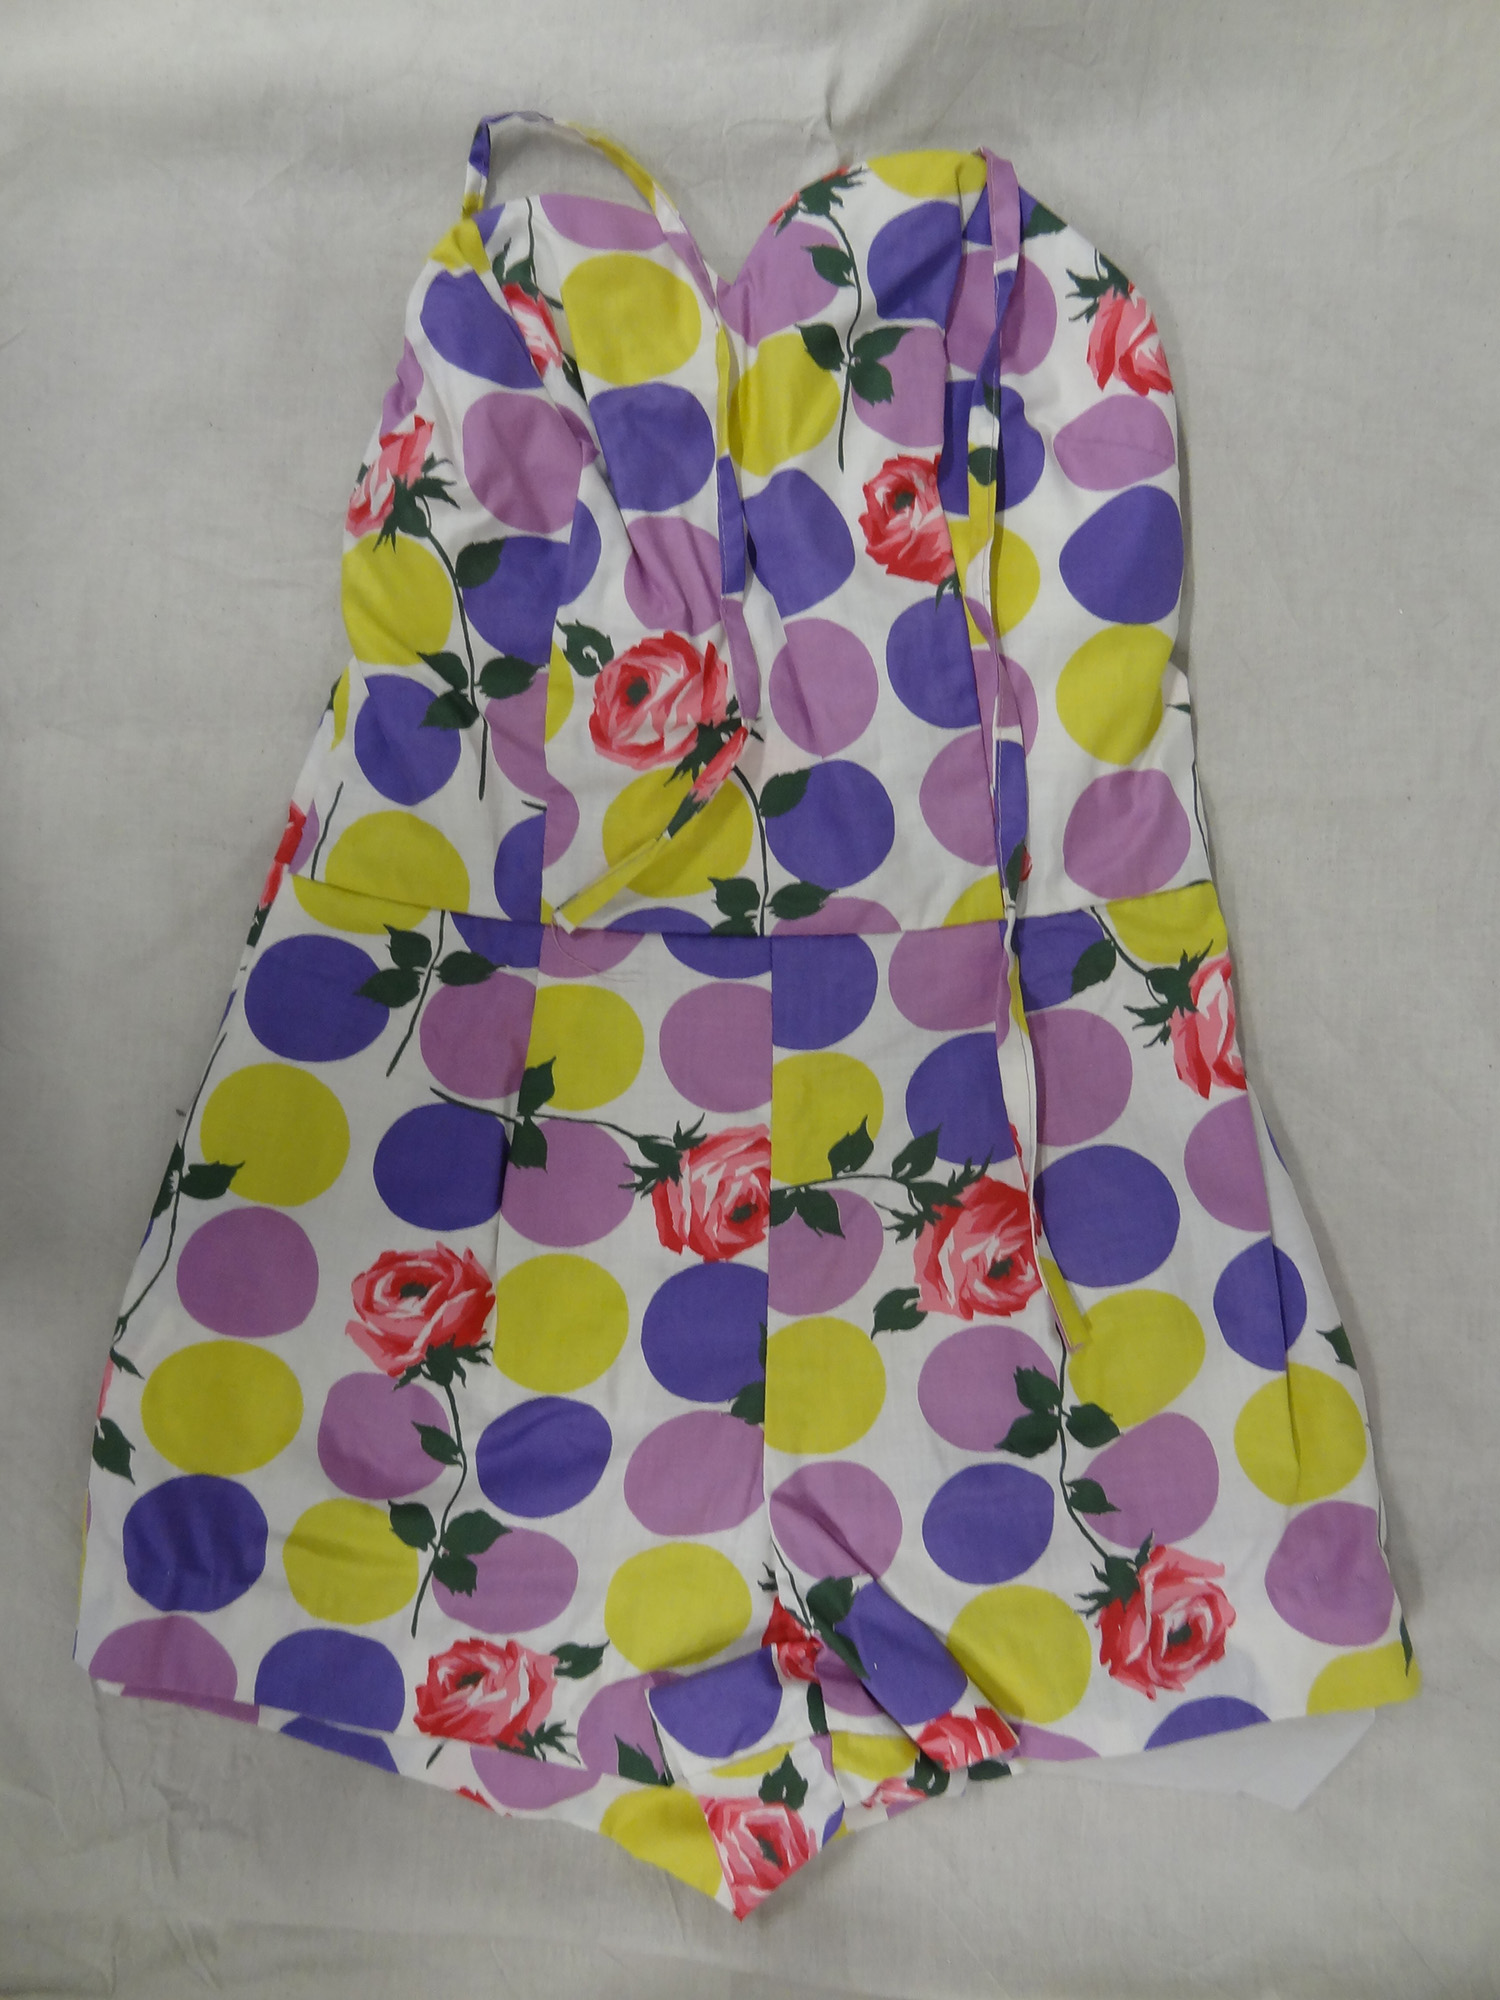 A 1950s women's bathing suit with a printed pattern featuring purple and yellow spots and pink roses